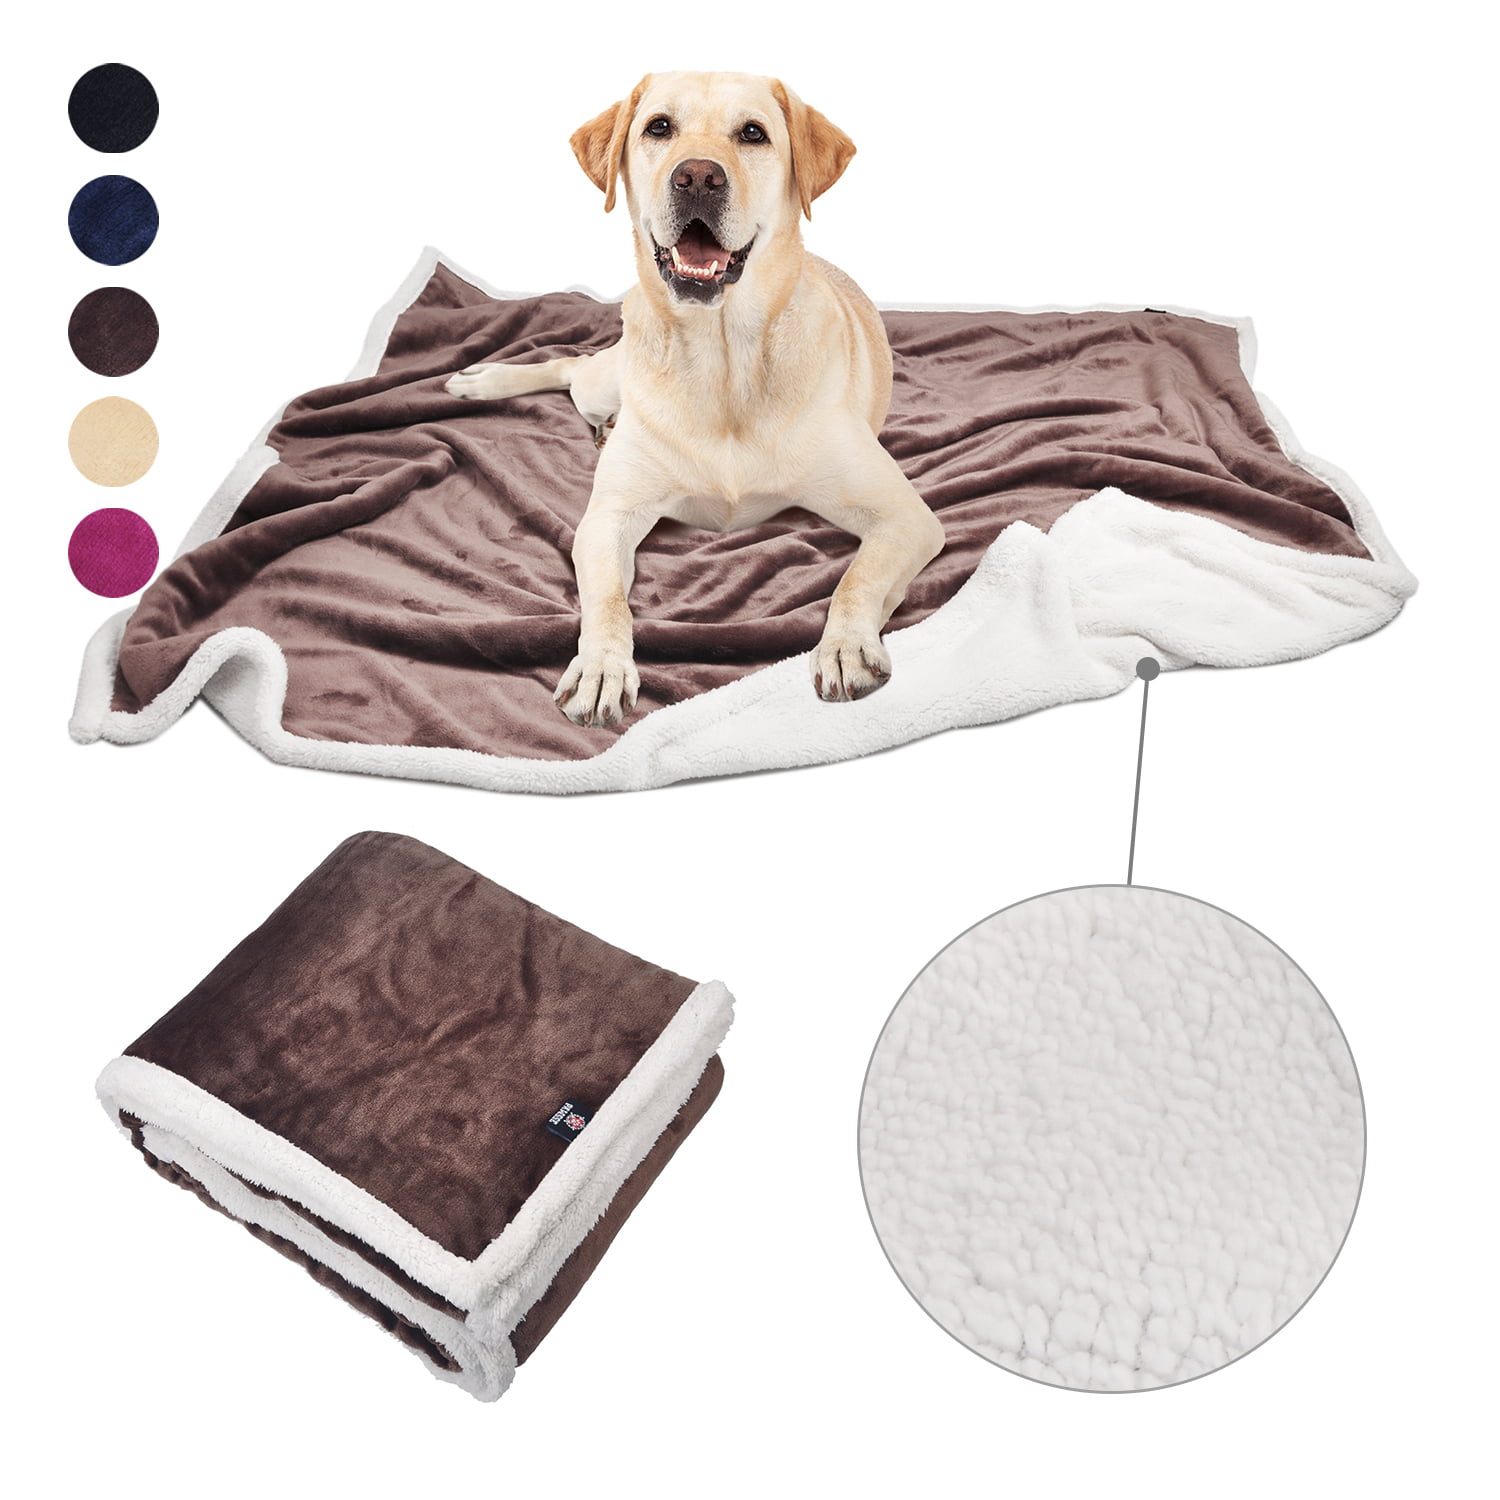 Comfortable Soft Blanket Bean Paste, 100 * 120CM Medium And Small Dogs Xnuoyo Dog Blanket Cat Blanket Fluffy Fleece Pet Blanket Plush Double-Layer Warm Blanket Suitable For Cats And Large